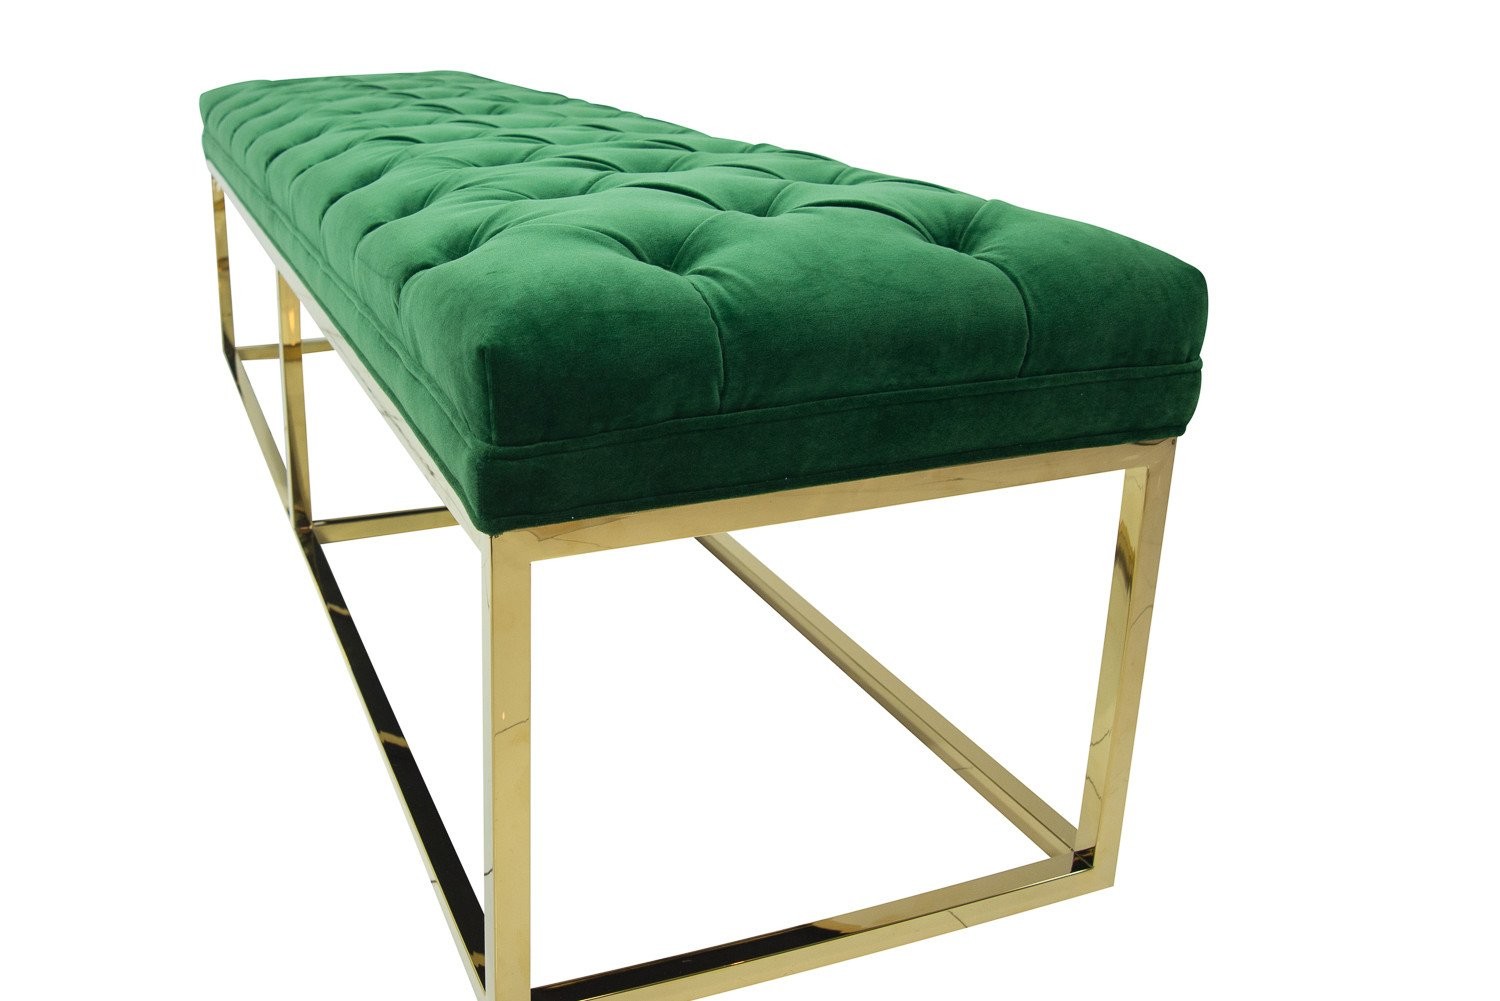 Quality HOT sale modern classic green velvet fabric tufted upholstery bench stainless steel frame ottoman for wedding event wholesale